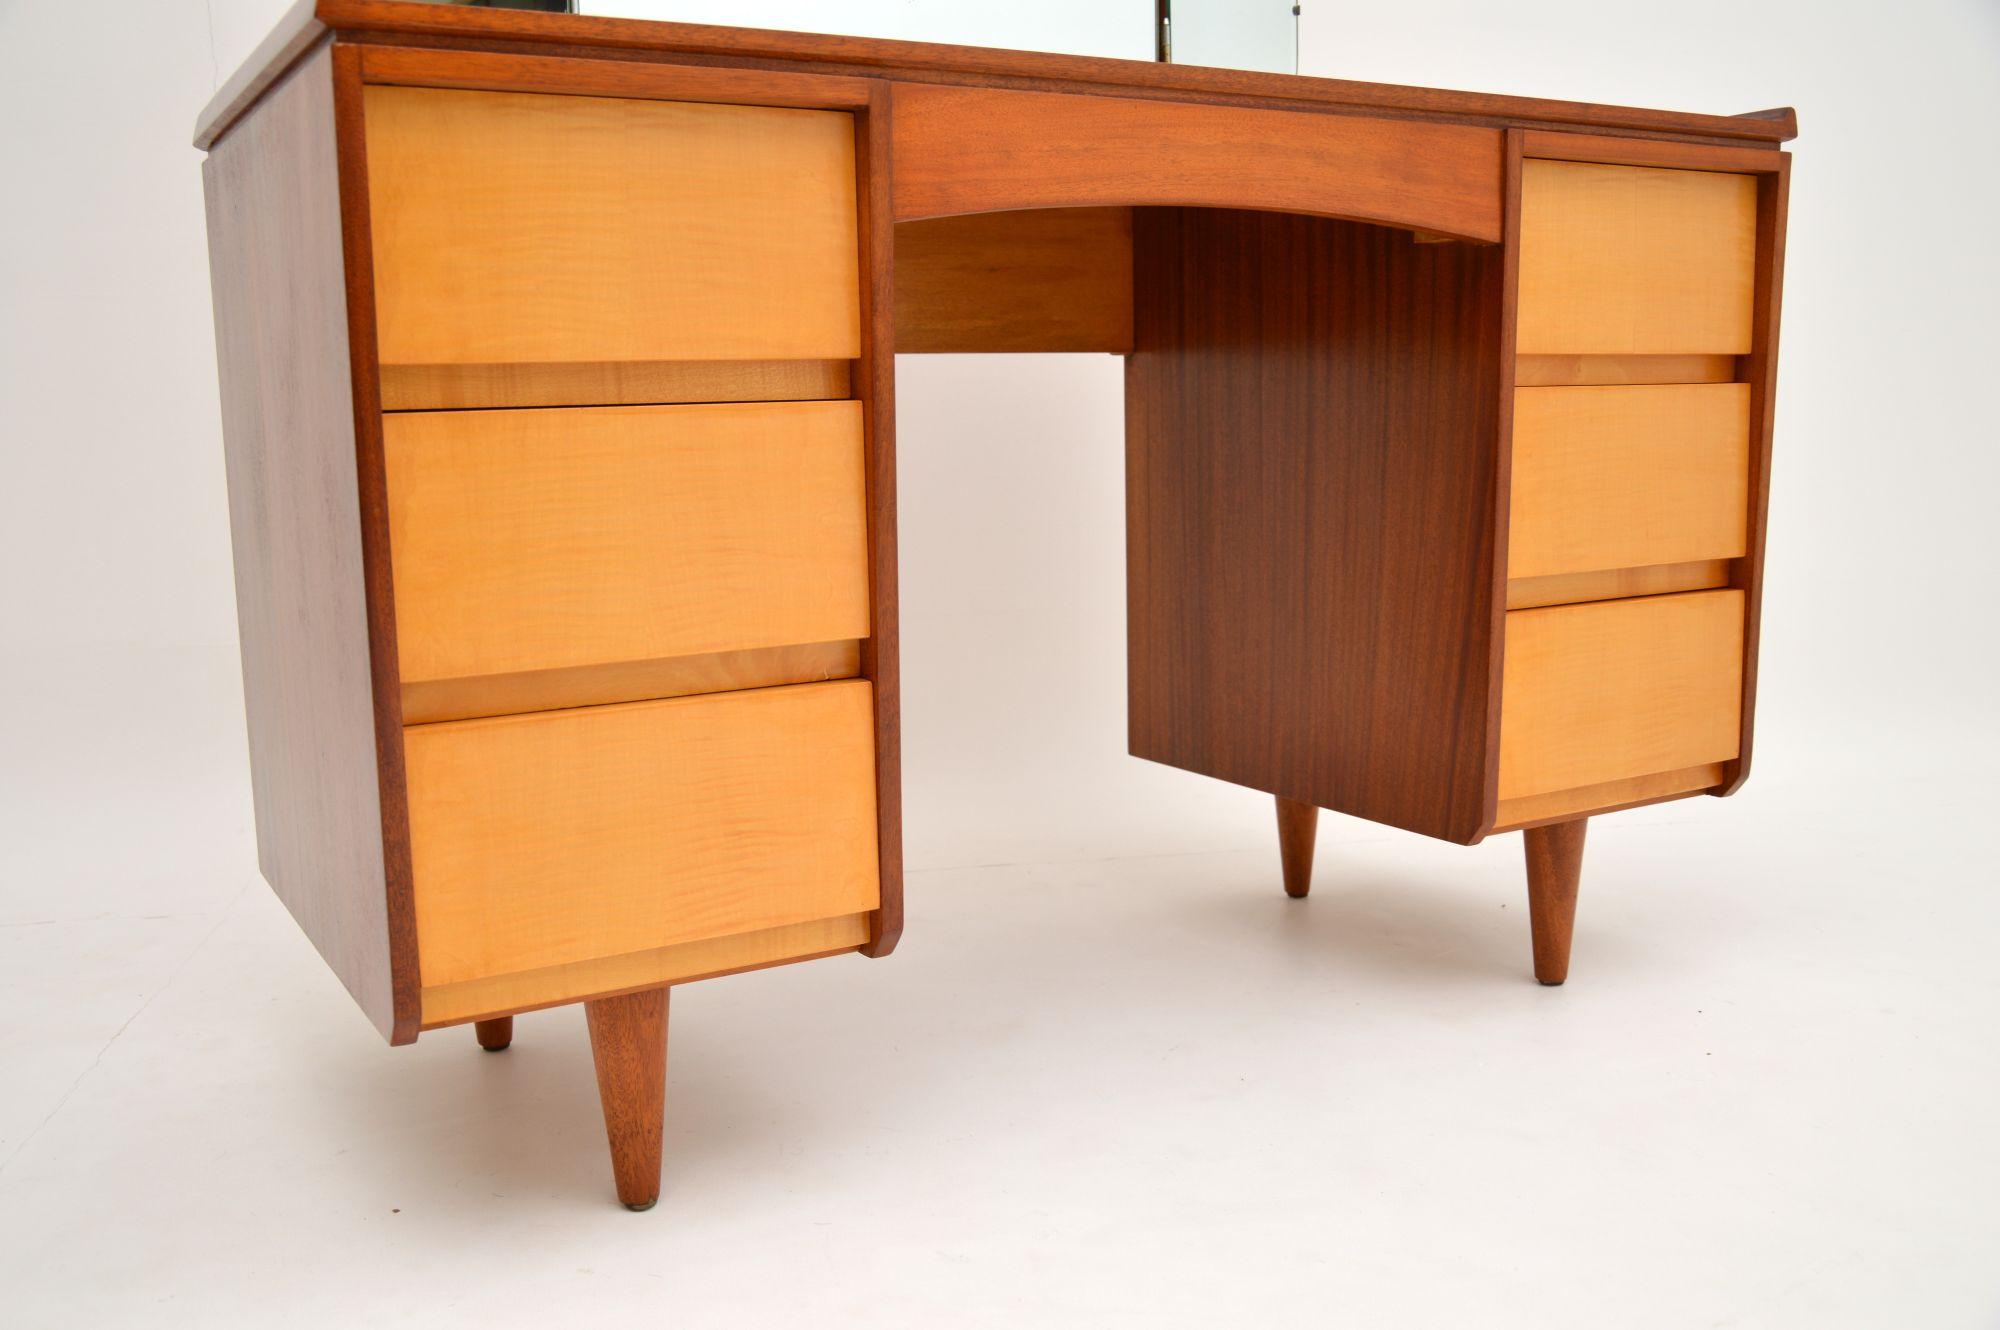 British 1960's Vintage Dressing Table in Sycamore & Walnut